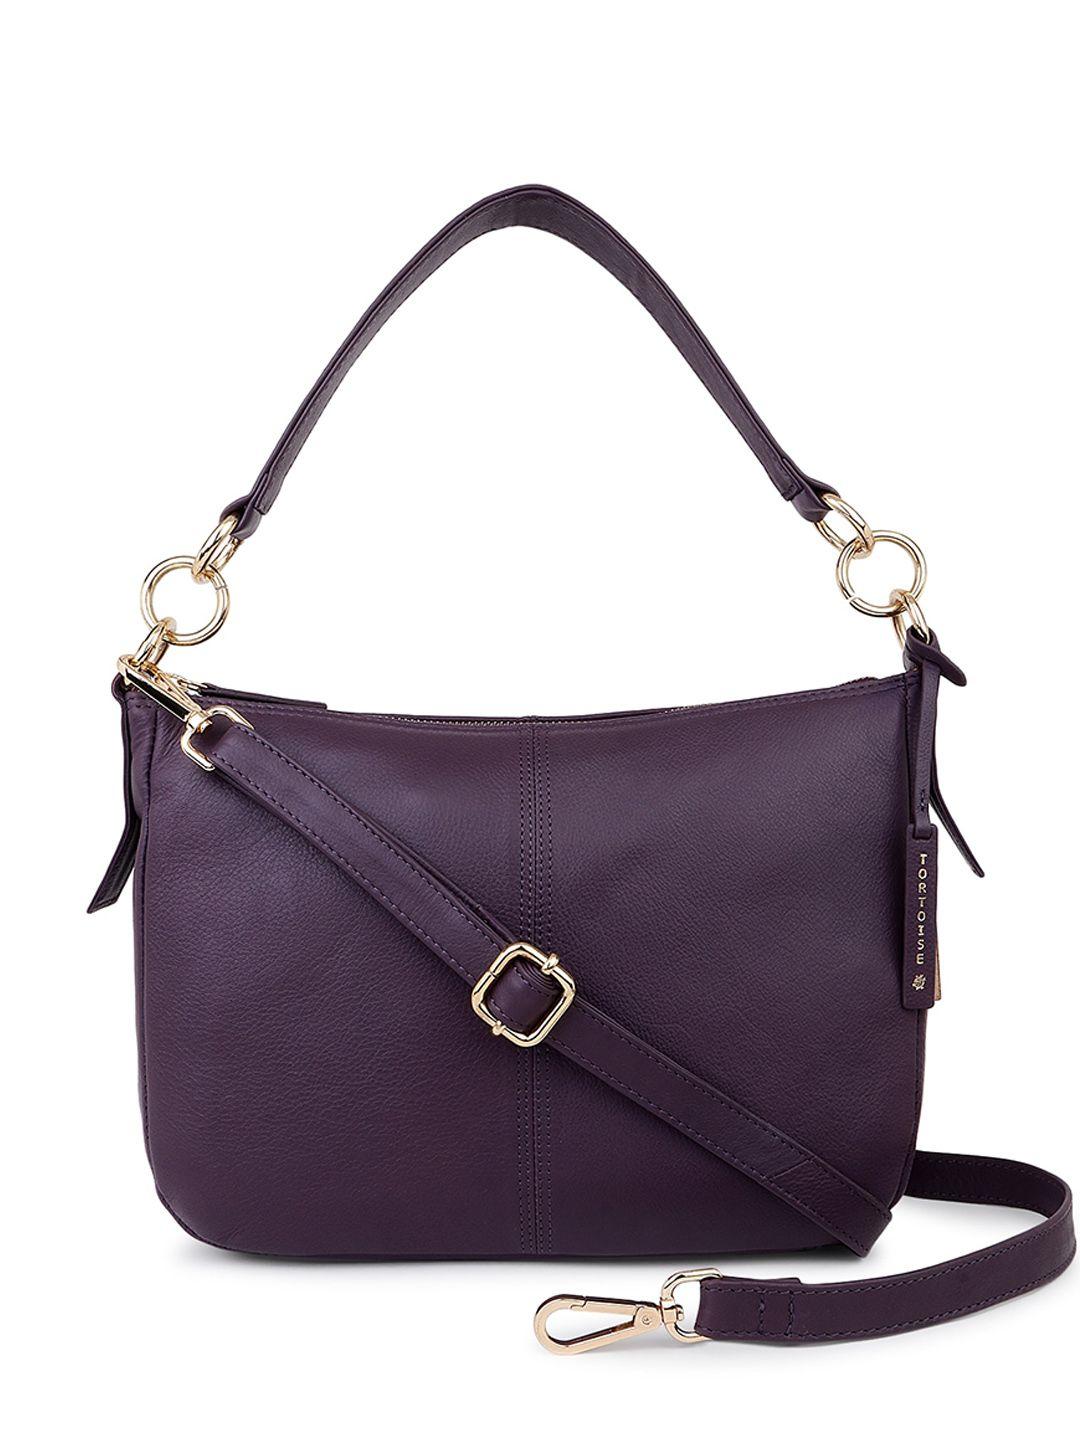 tortoise leather structured hobo bag